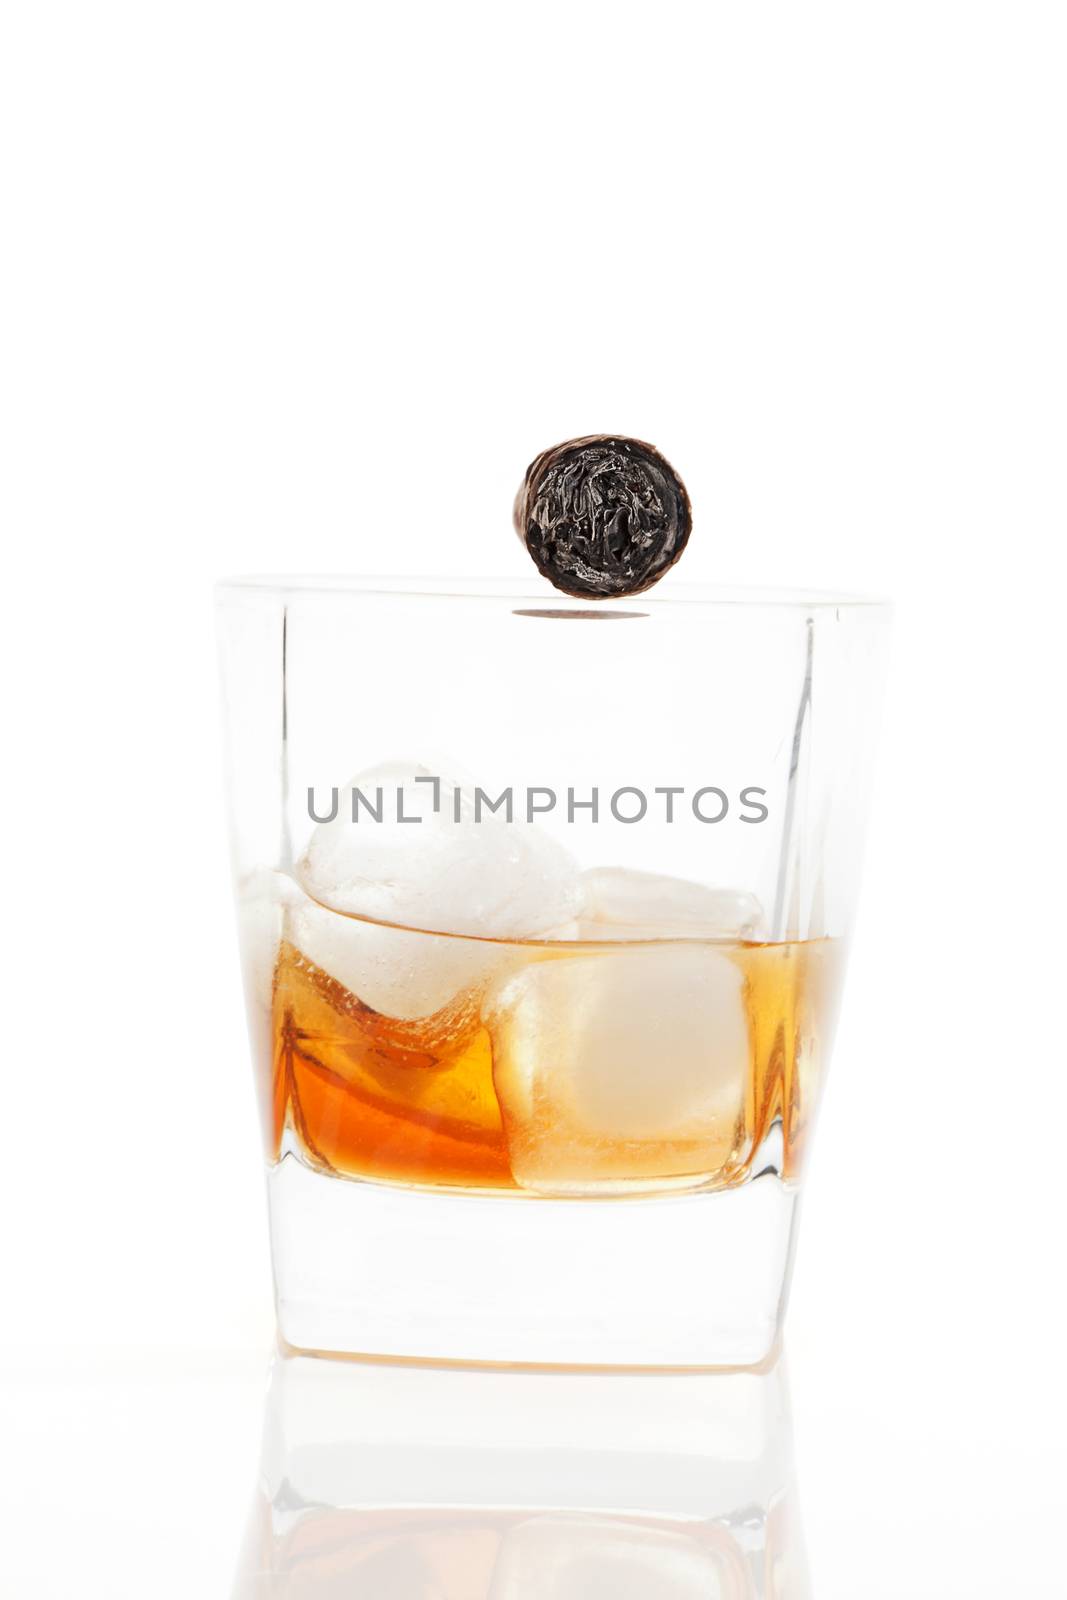 Luxurious whiskey with cigar background. Leisure concept.